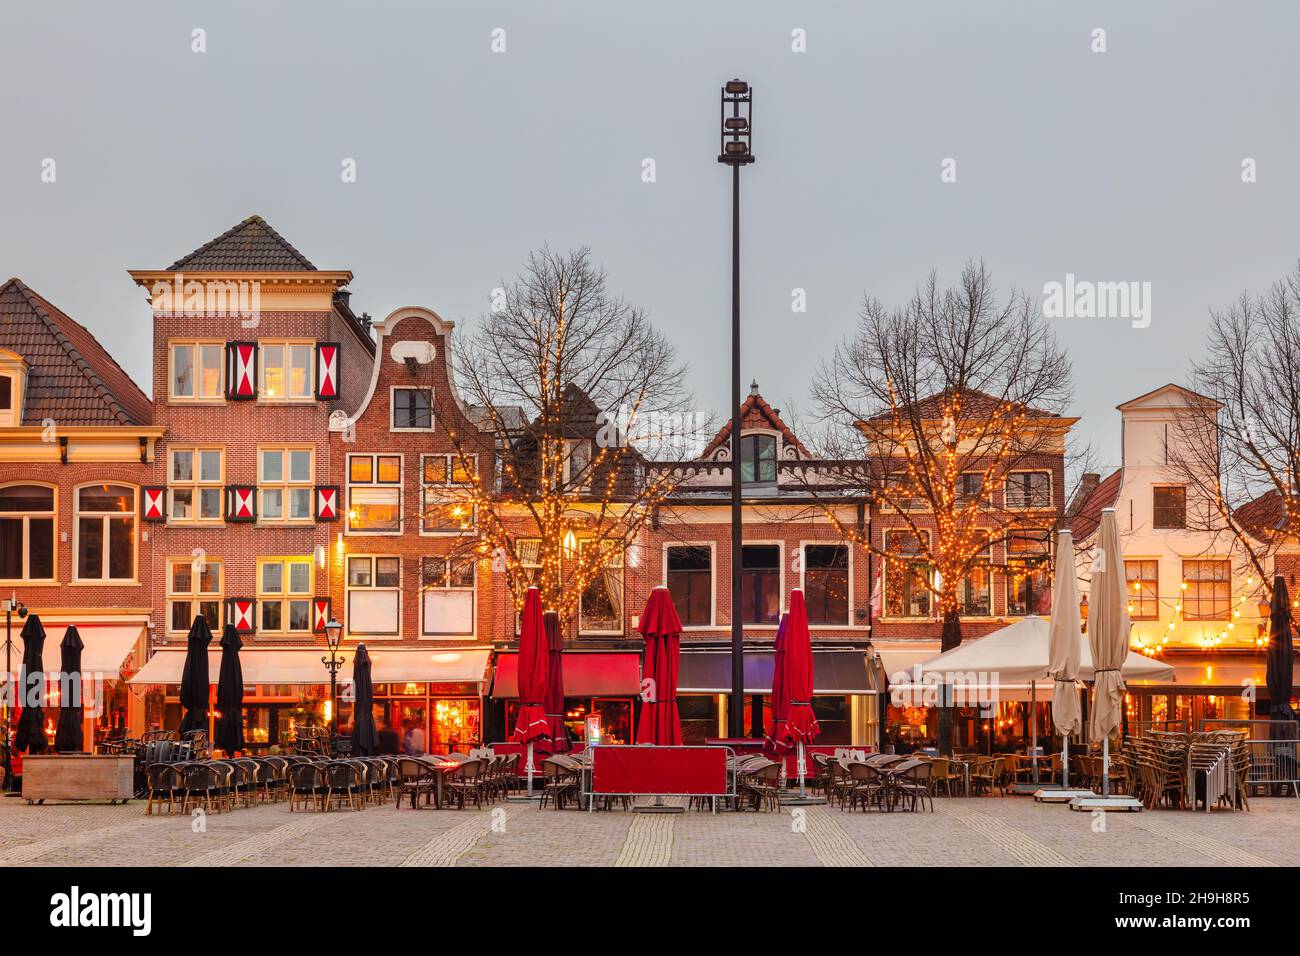 Sunset view of the famous Dutch Waagplein with pubs and restaurants in the city center of Alkmaar, The Netherlands Stock Photo